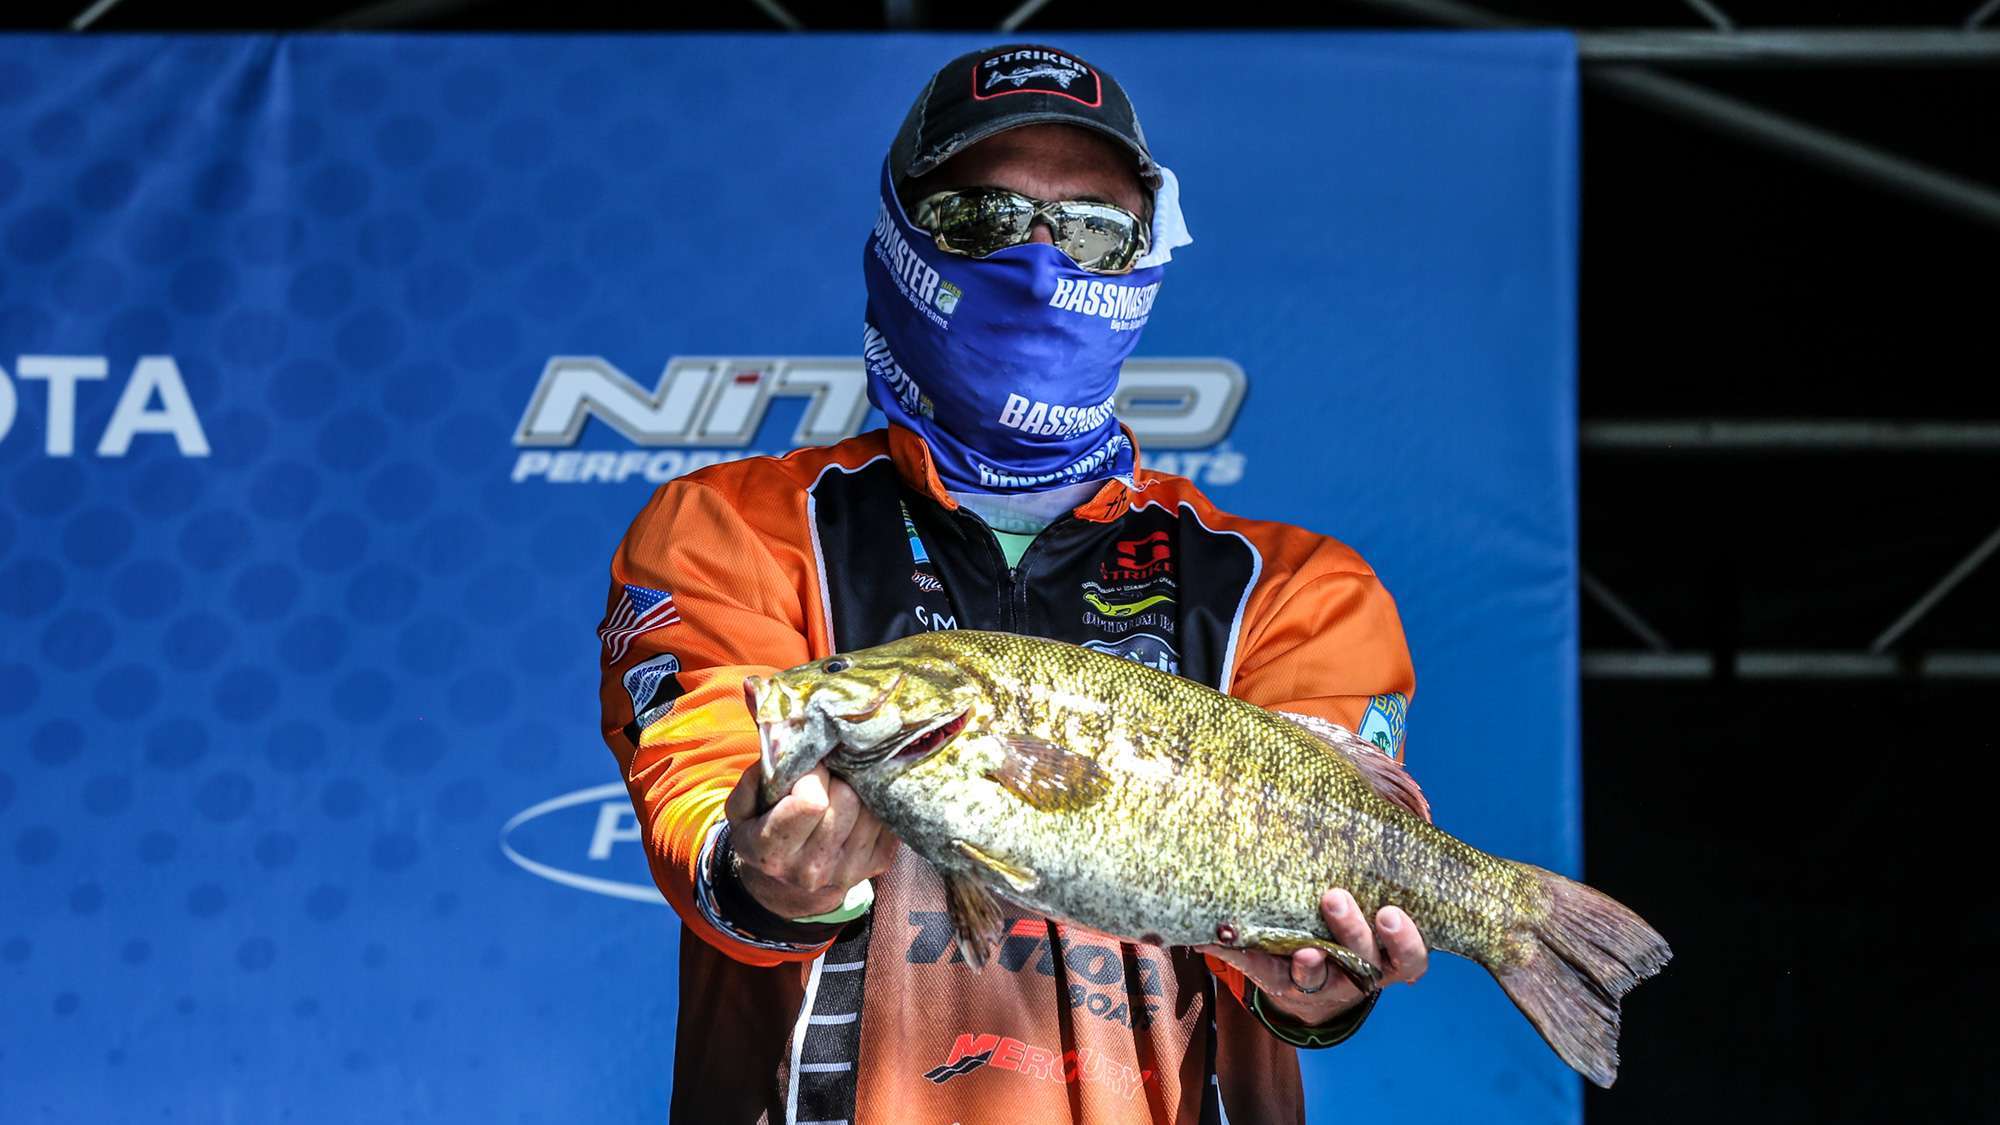 Big smallmouth bass also help reign in fans. Paul Mueller brought in this 7-pound, 13-ounce smallmouth in last yearâs tournament. His personal best is believed to be the largest ever caught in Bassmaster competition, and that freak of nature helped Mueller to a 27-1 bag and a lead through the first three days.